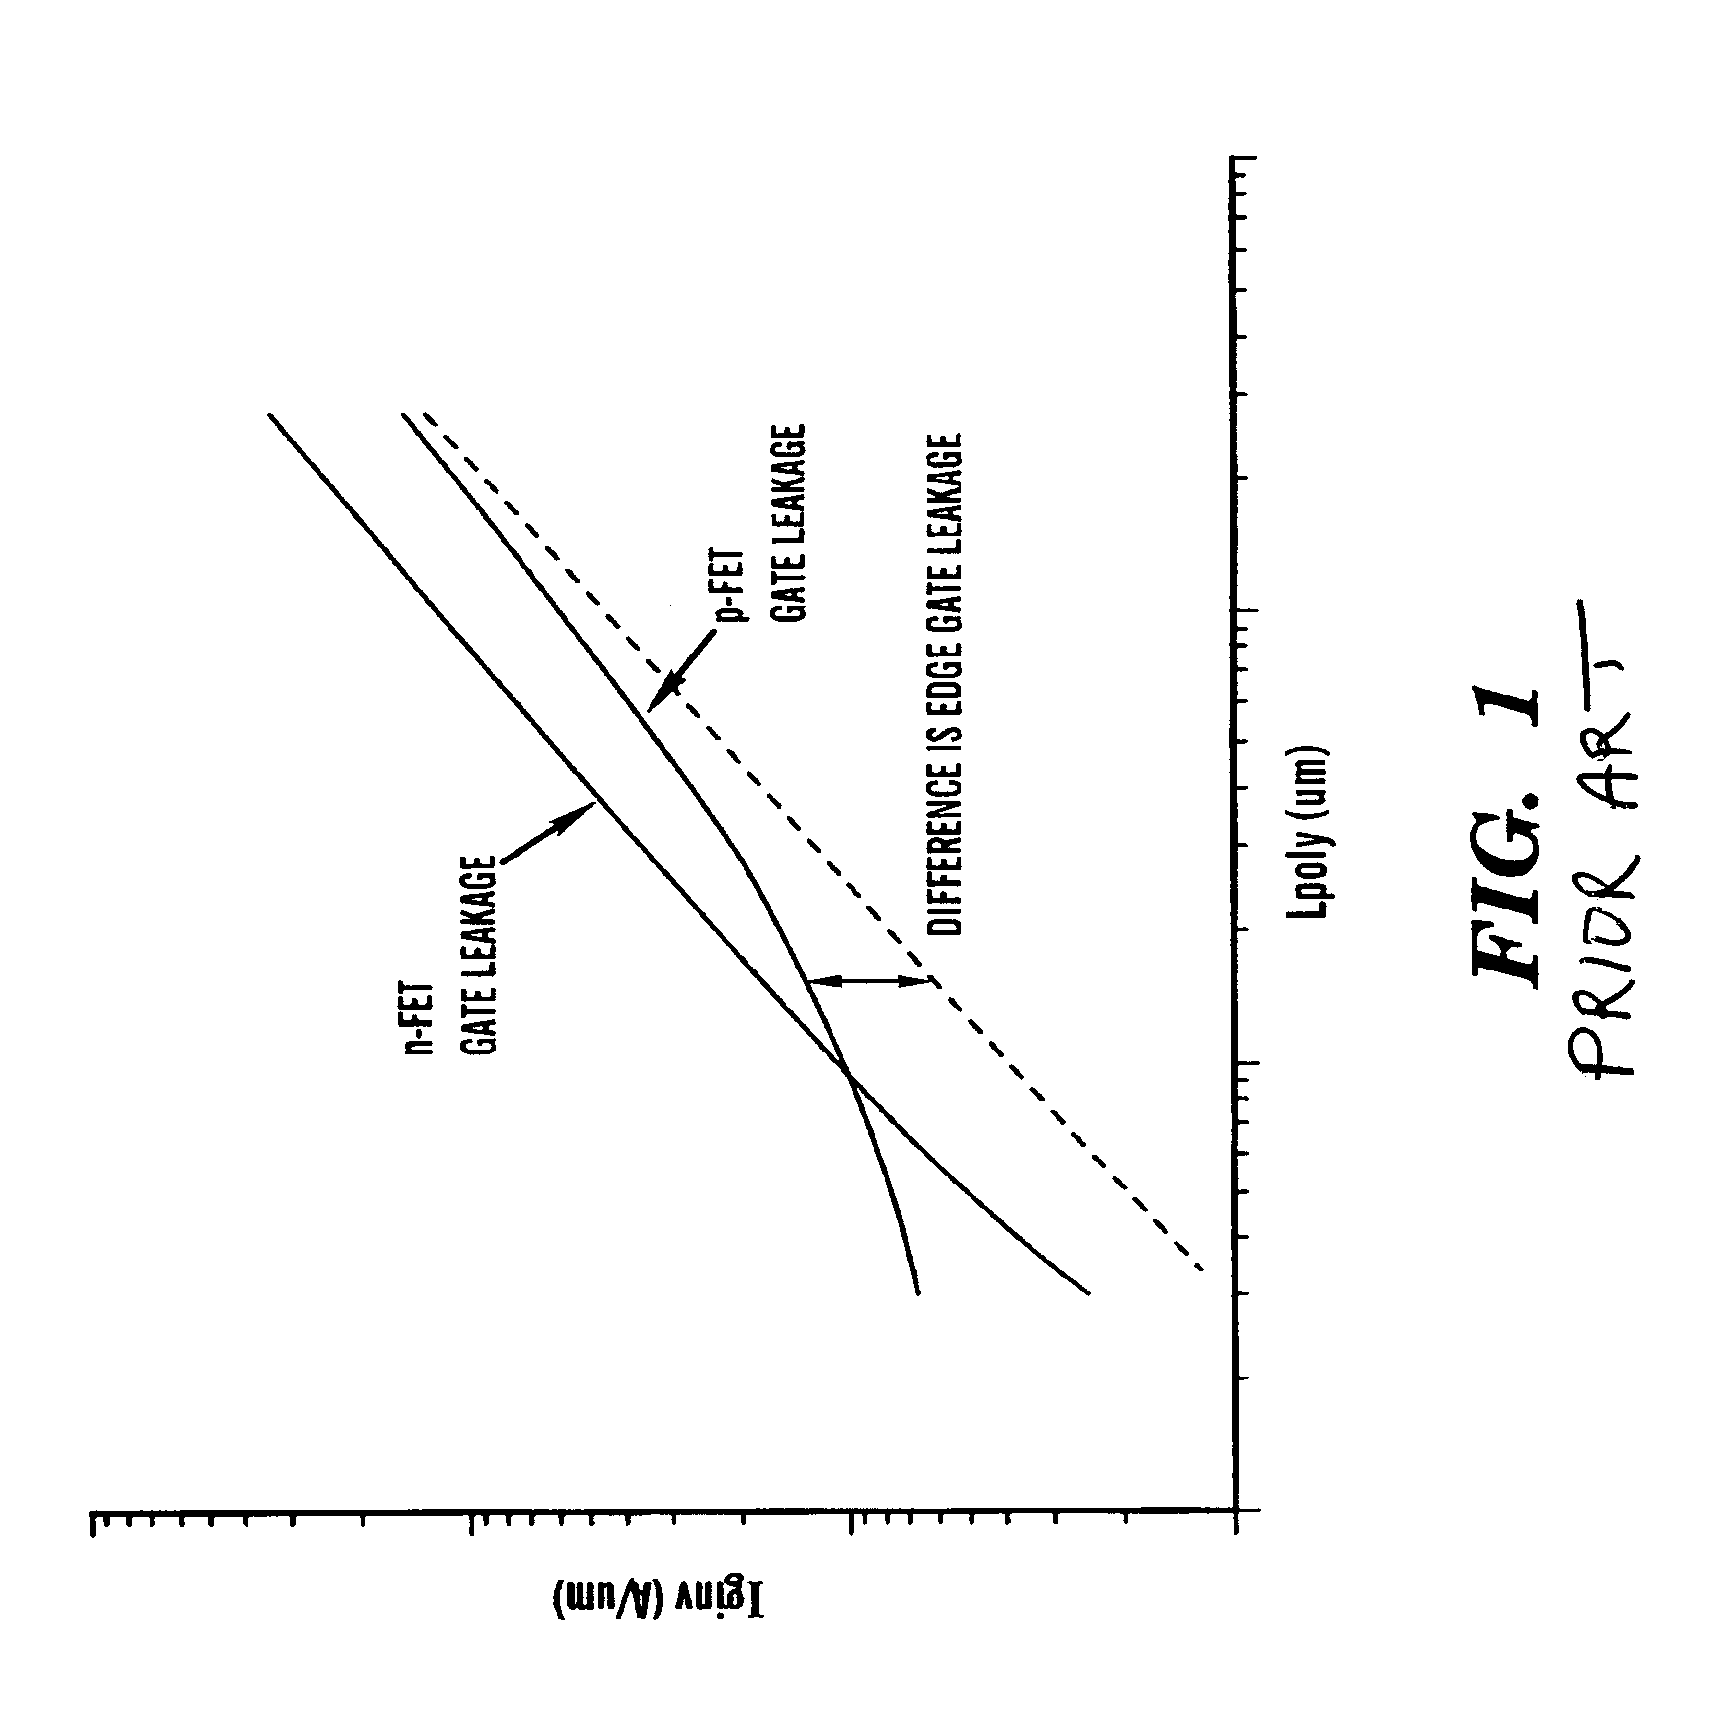 Method for forming semiconductor devices having reduced gate edge leakage current